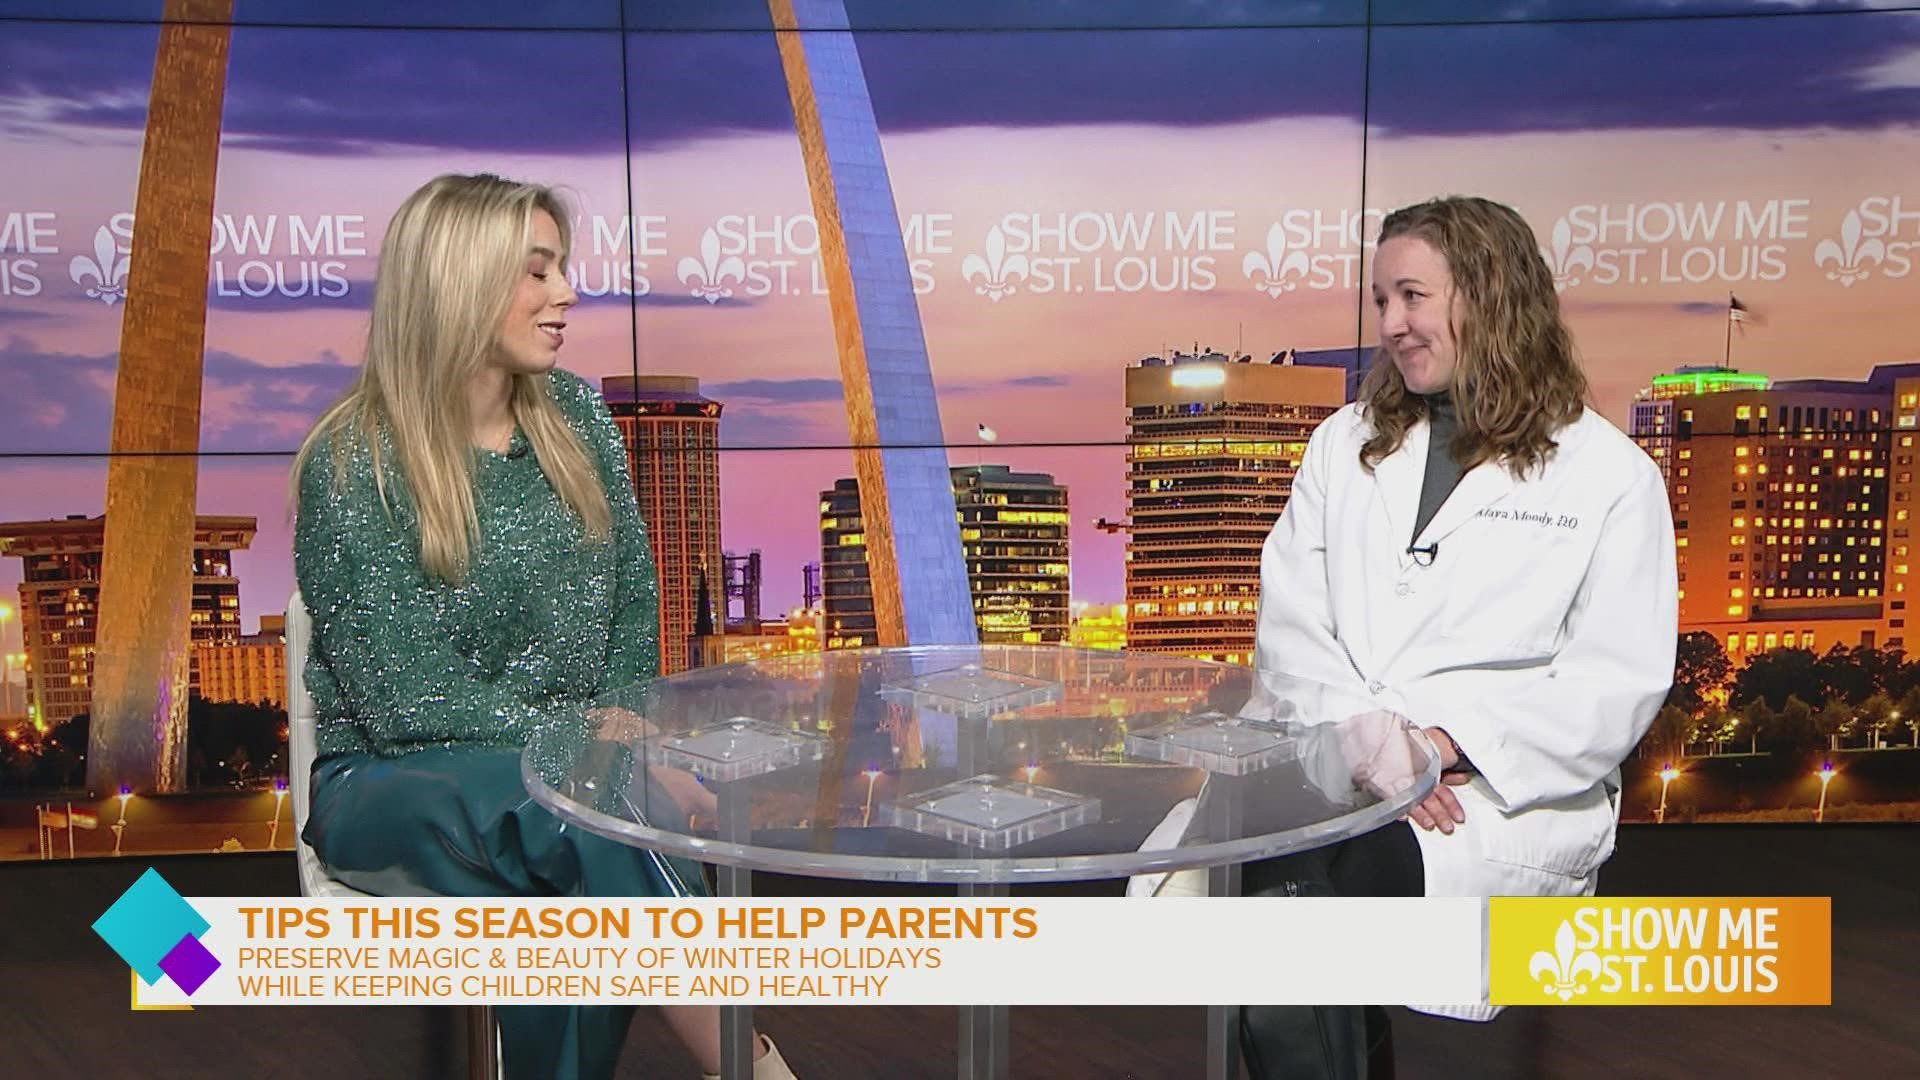 Dr. Maya Moody of The Missouri Chapter, American Academy of Pediatrics joined Mary in studio to share tips for parents and kids this holiday season.